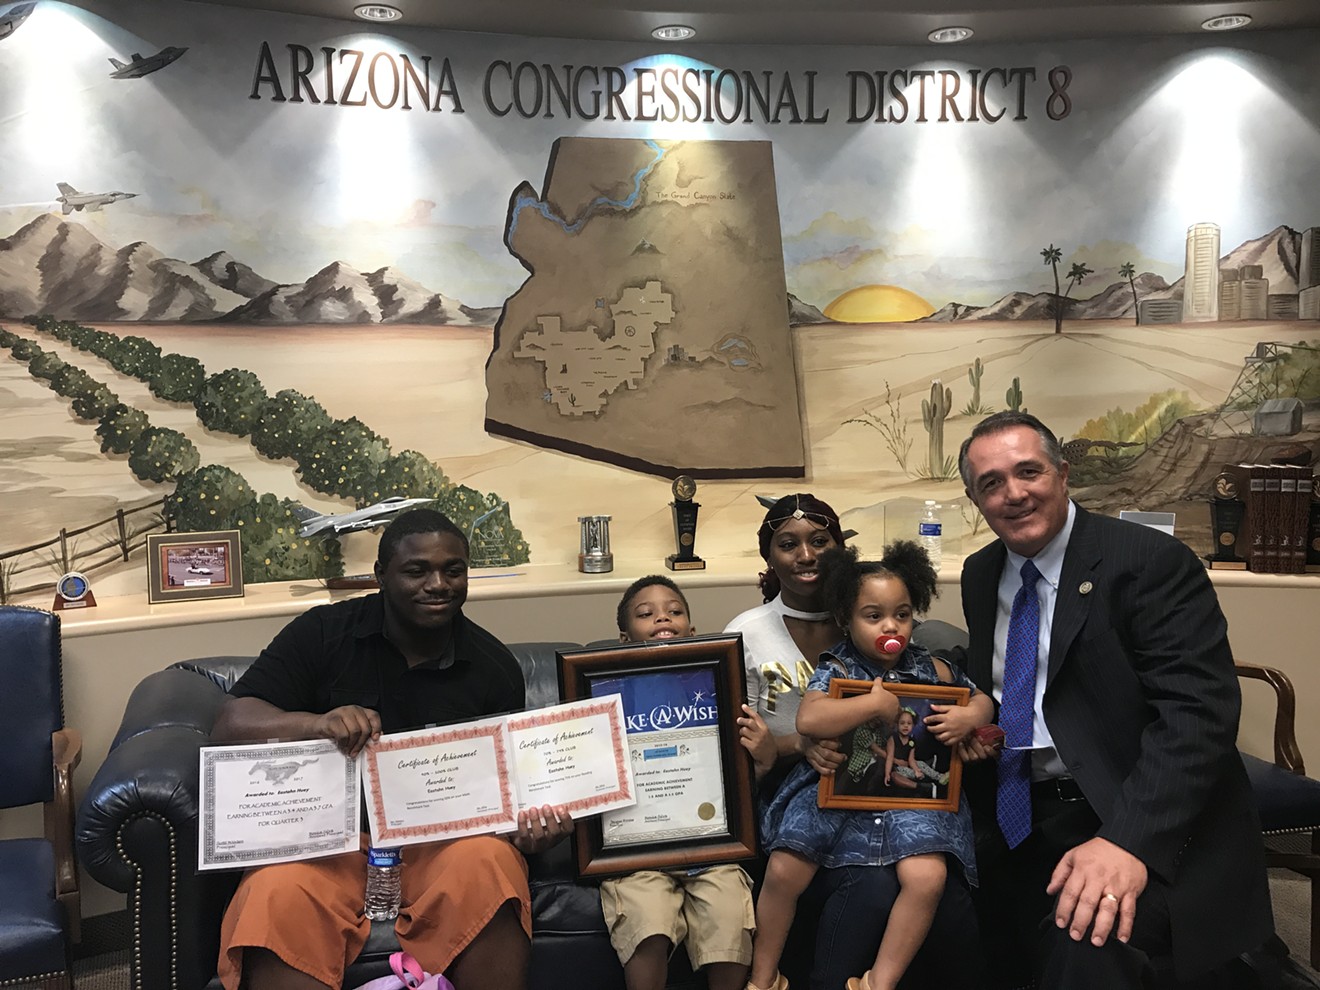 Brianna Huey and her boyfriend, Malcom Williams, and Huey's two children, Eastahn and Melianna, pose with Representative Trent Franks at his congressional office. The Huey family relies on health care coverage from the government and urged Franks to not support the Senate bill.